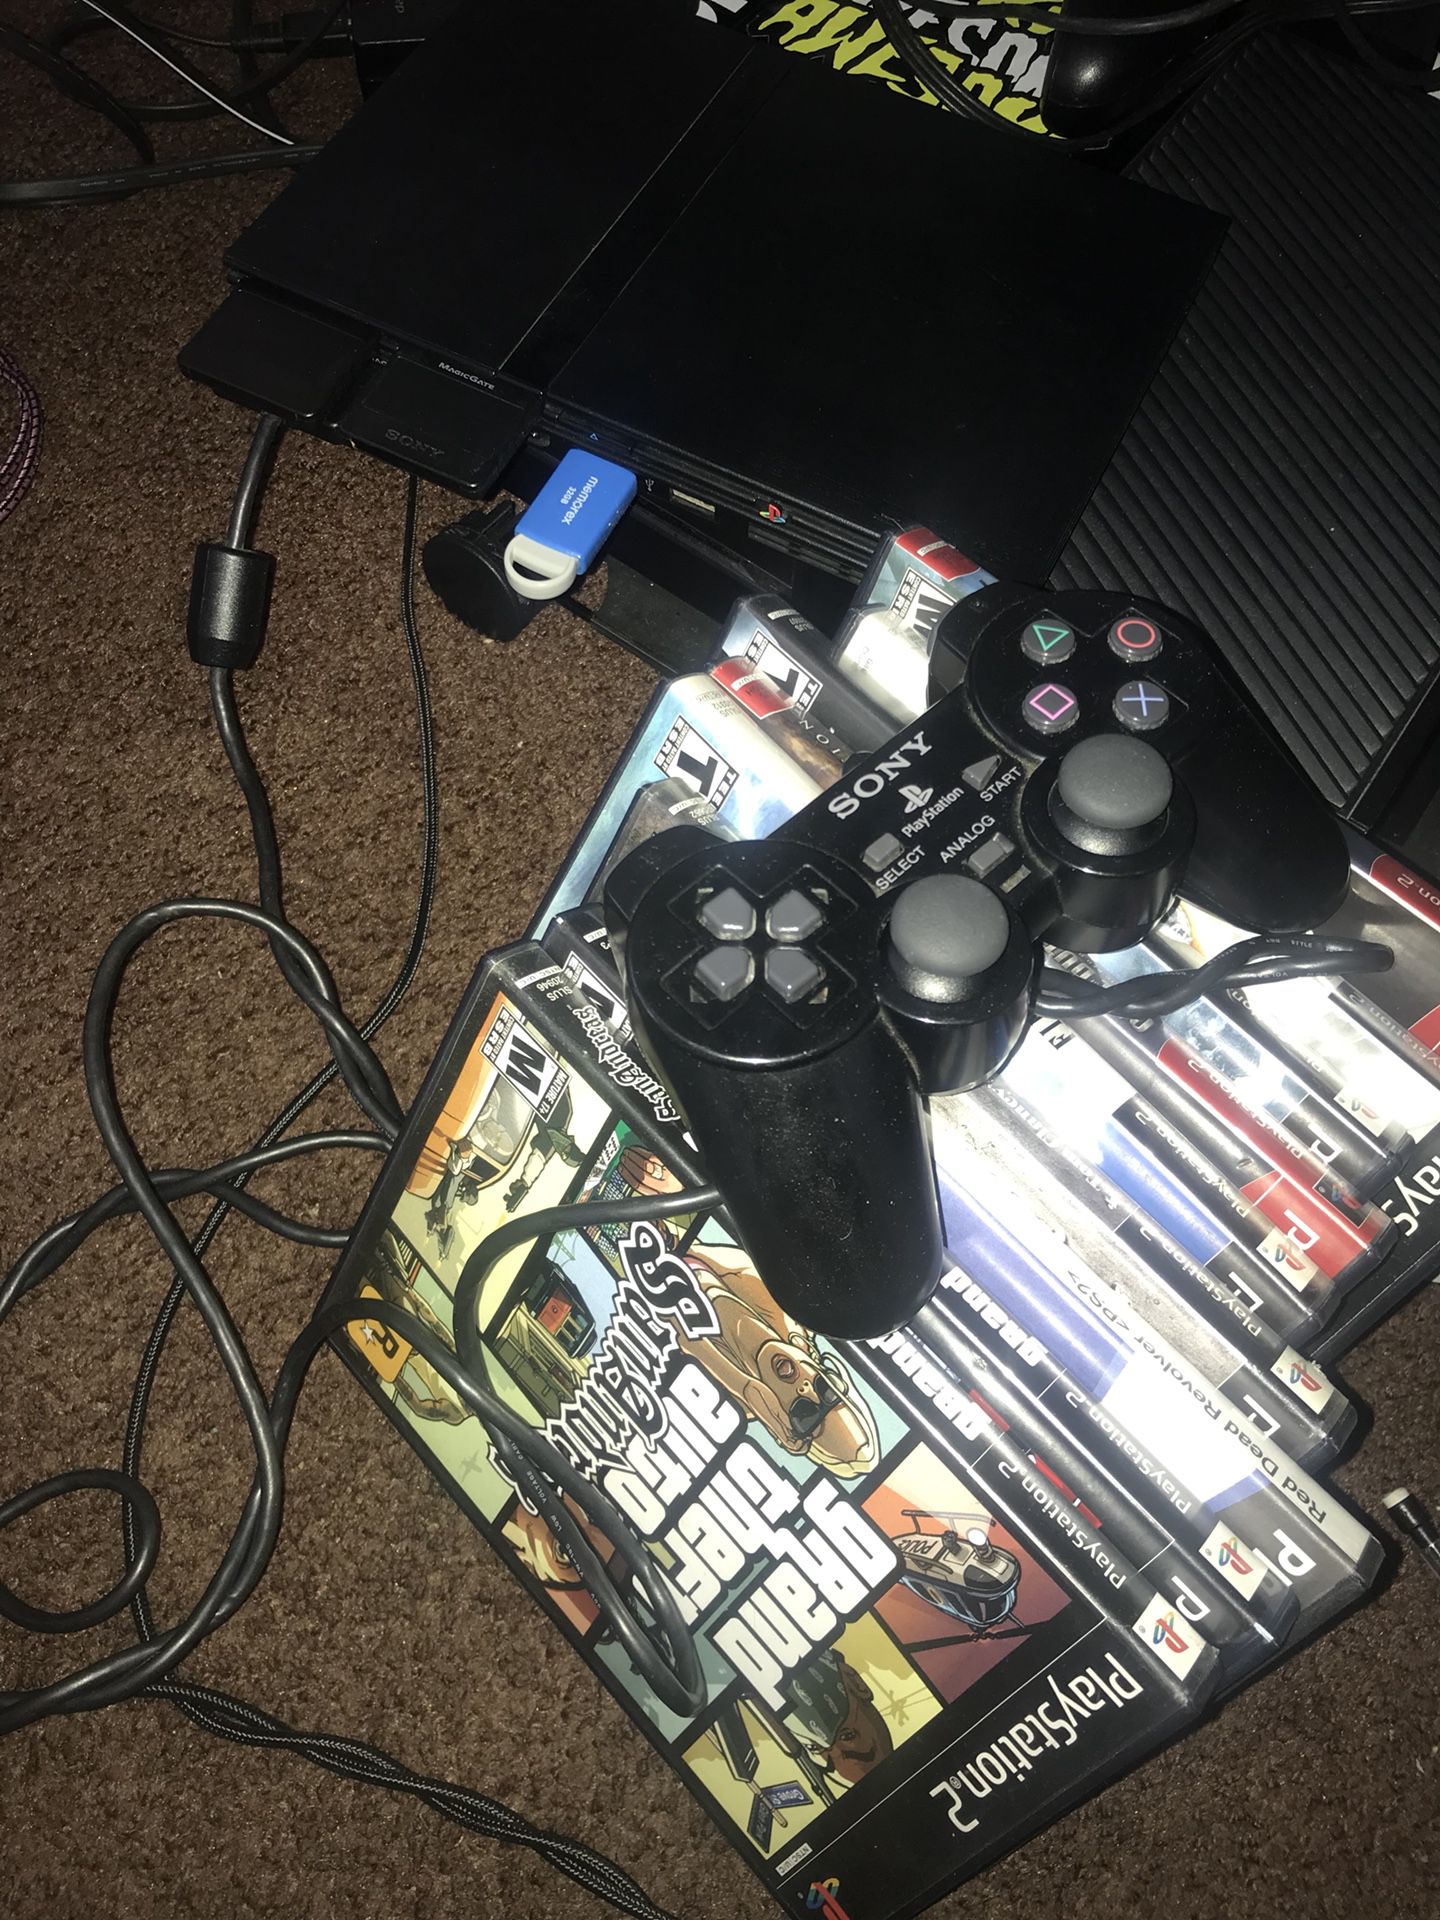 PS2 slim Softmodded with game discs and on flash drive